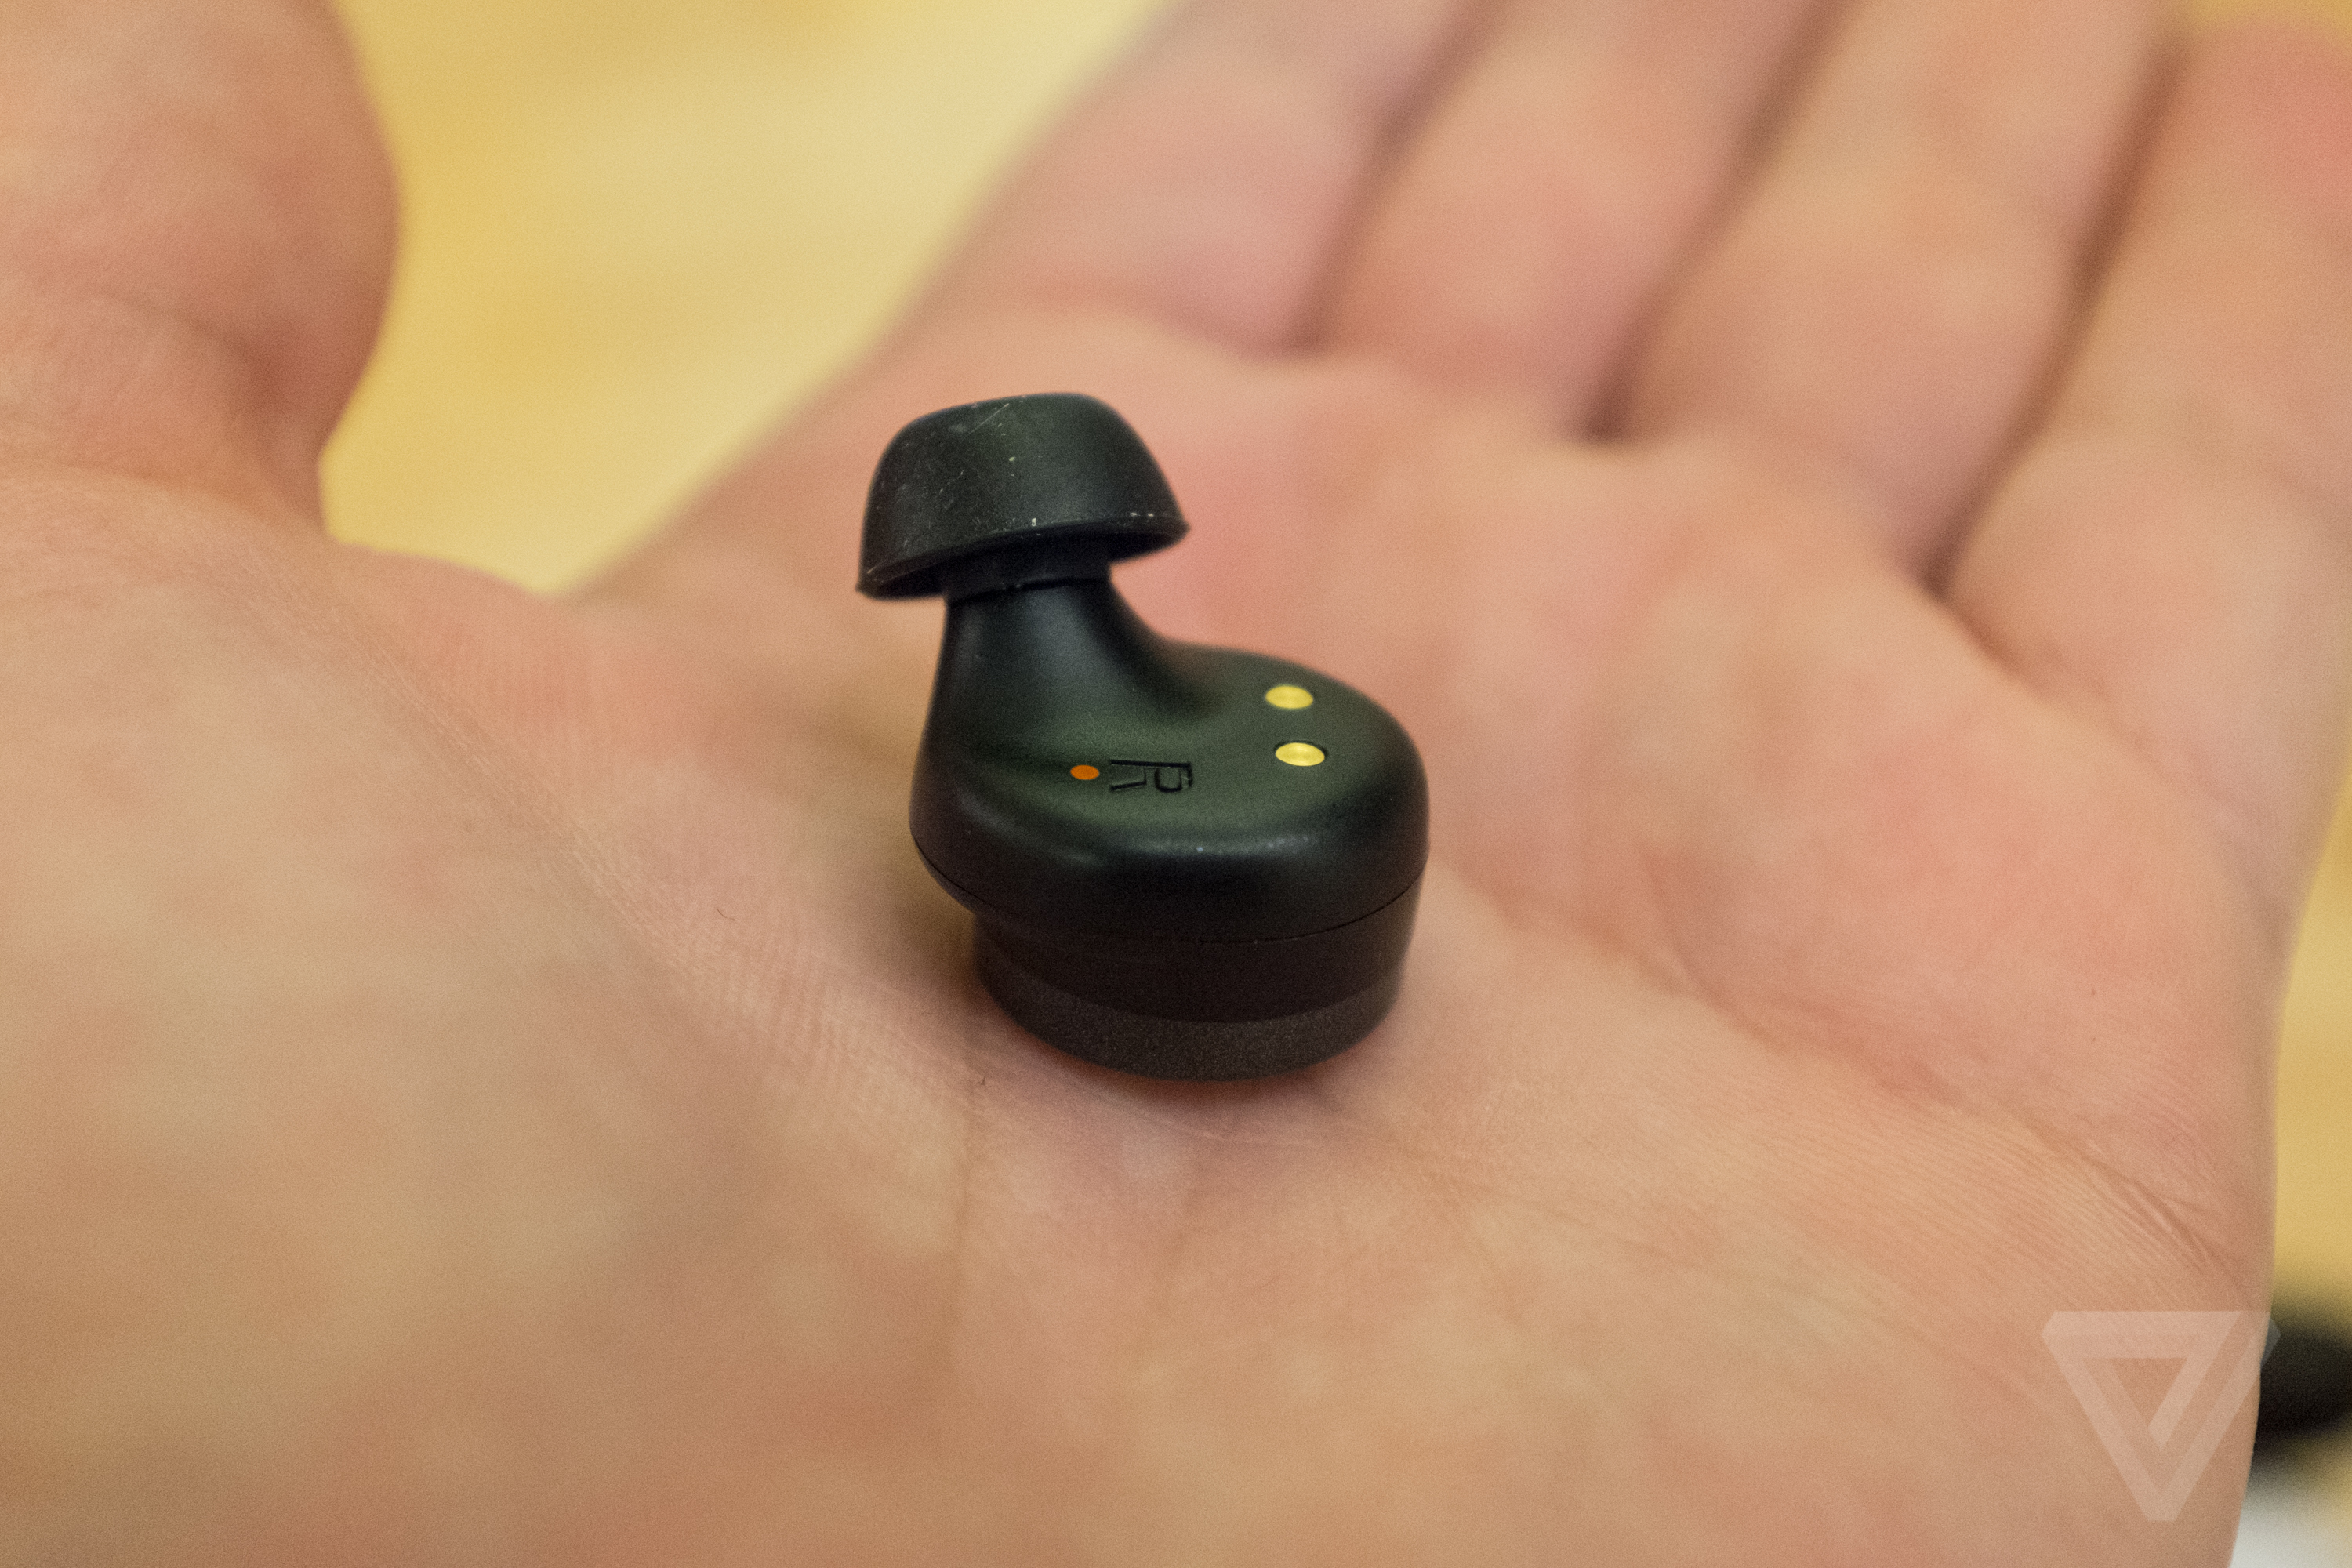 Here active listening earbuds in photos